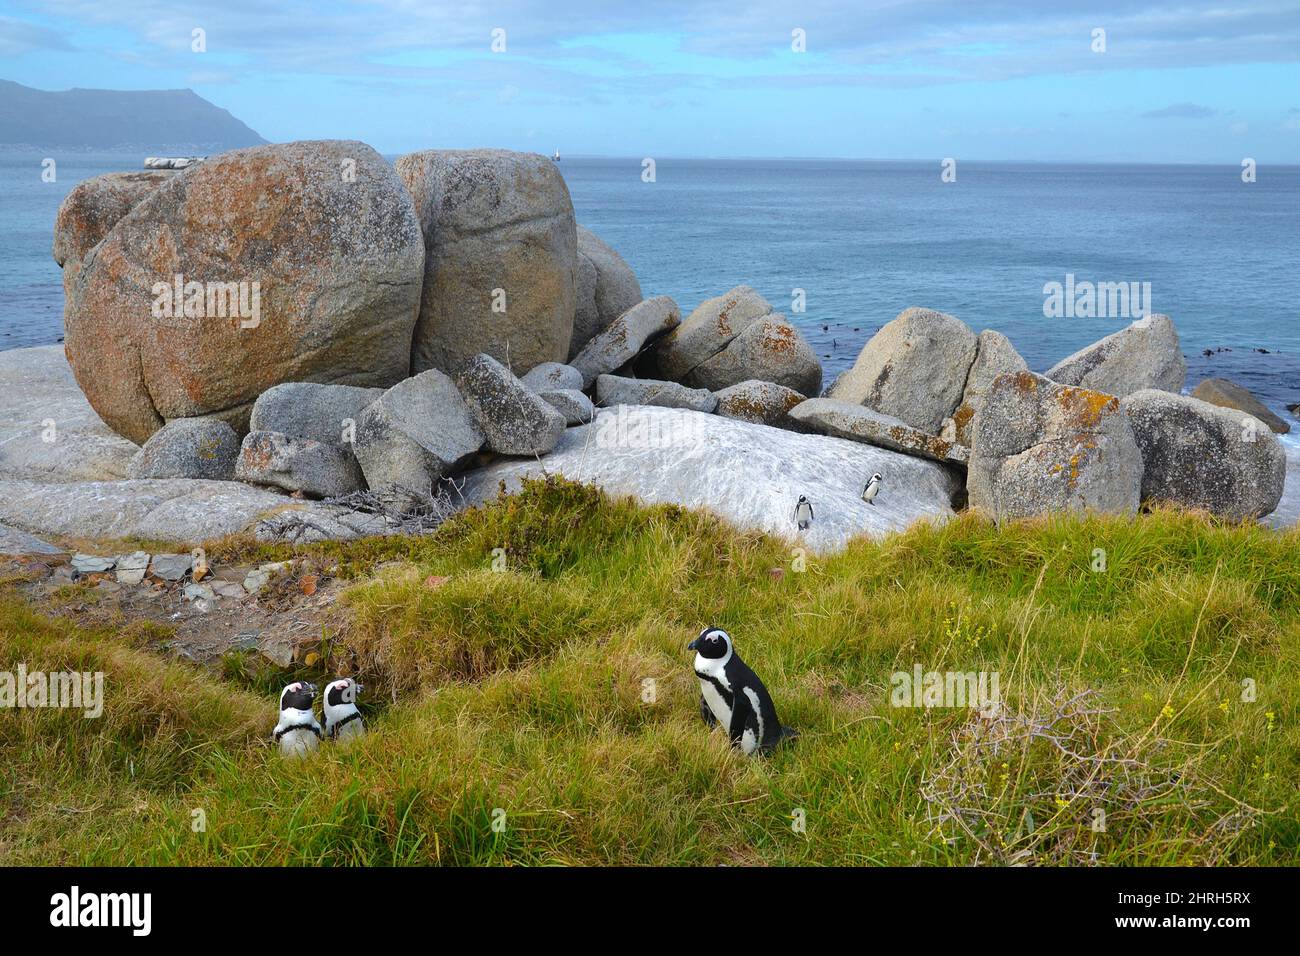 African penguin among boulders in grass on ocean coast.Two penguins are watching the third passing penguin. Near Cape Town, South Africa Stock Photo